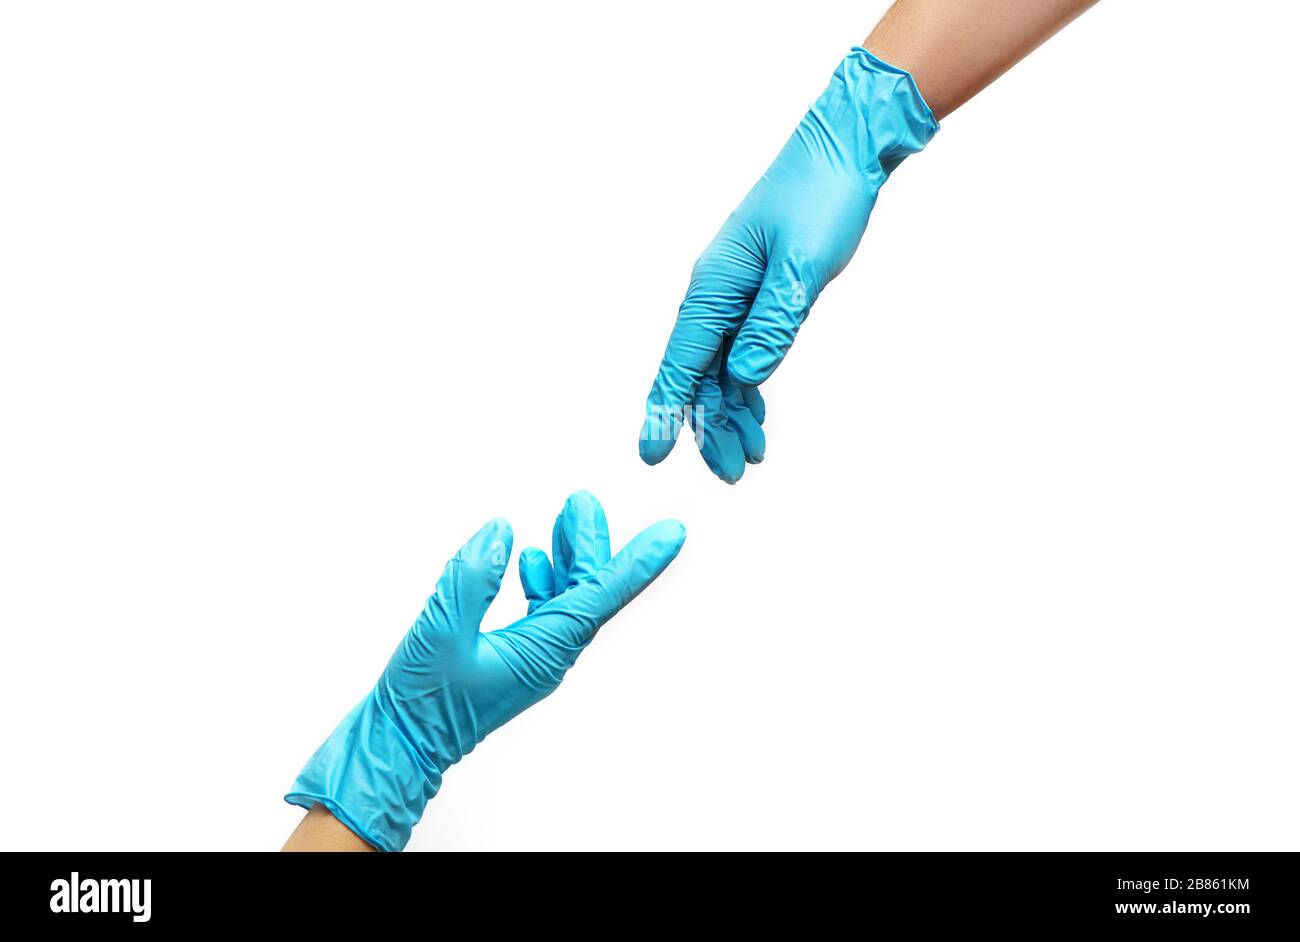 https://c8.alamy.com/comp/2B861KM/hands-of-people-in-medical-gloves-reaching-out-for-each-other-on-white-background-covid-19-pandemic-concept-2B861KM.jpg